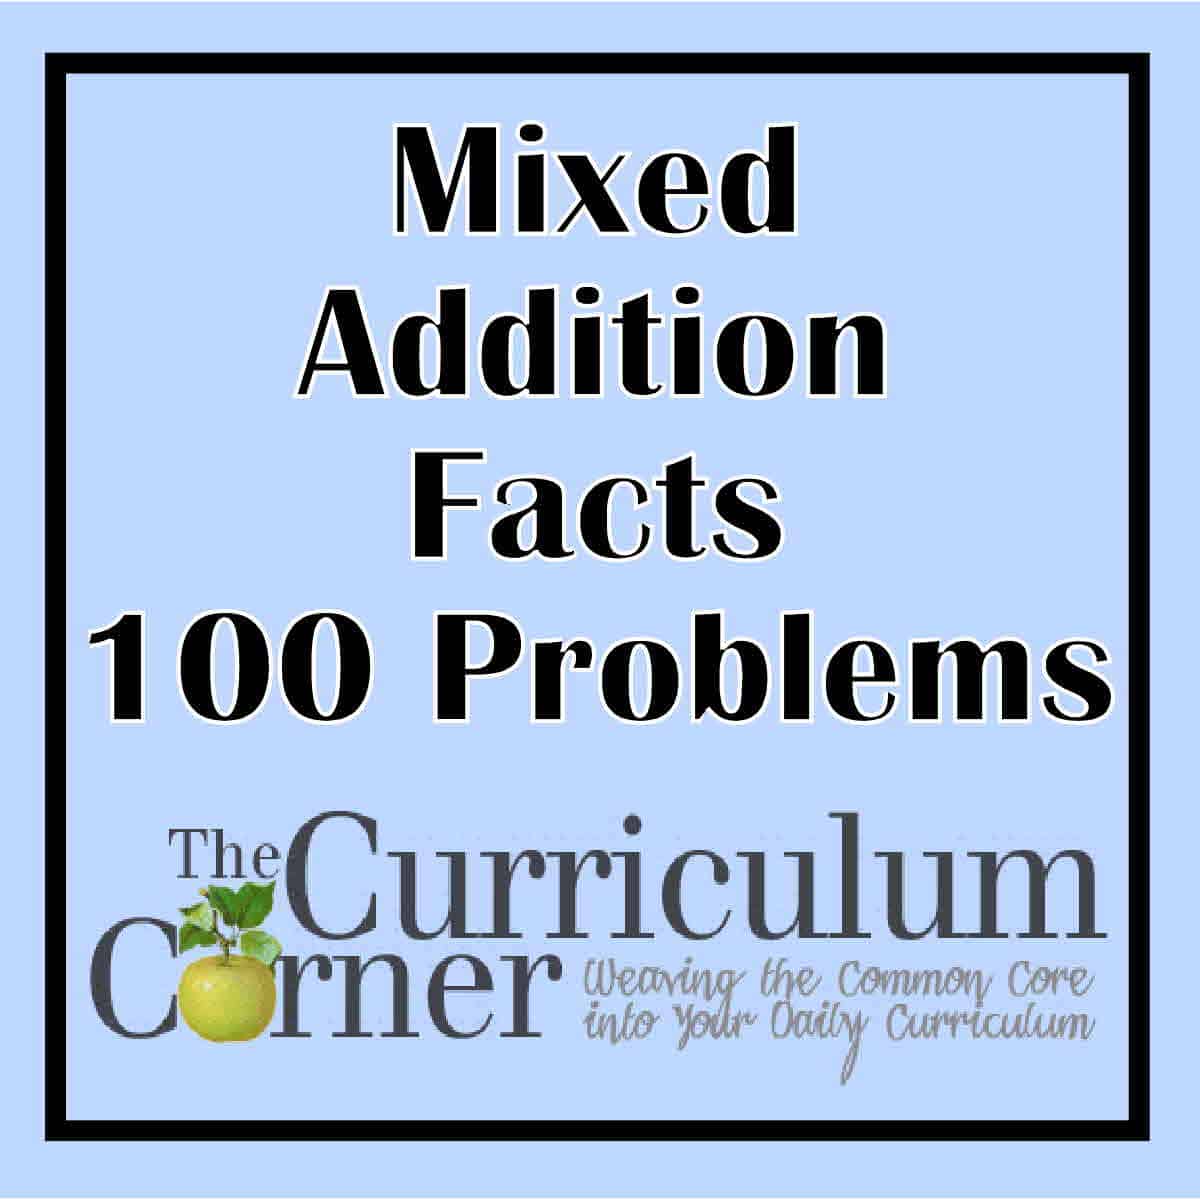 100-addition-facts-mixed-review-pages-the-curriculum-corner-123